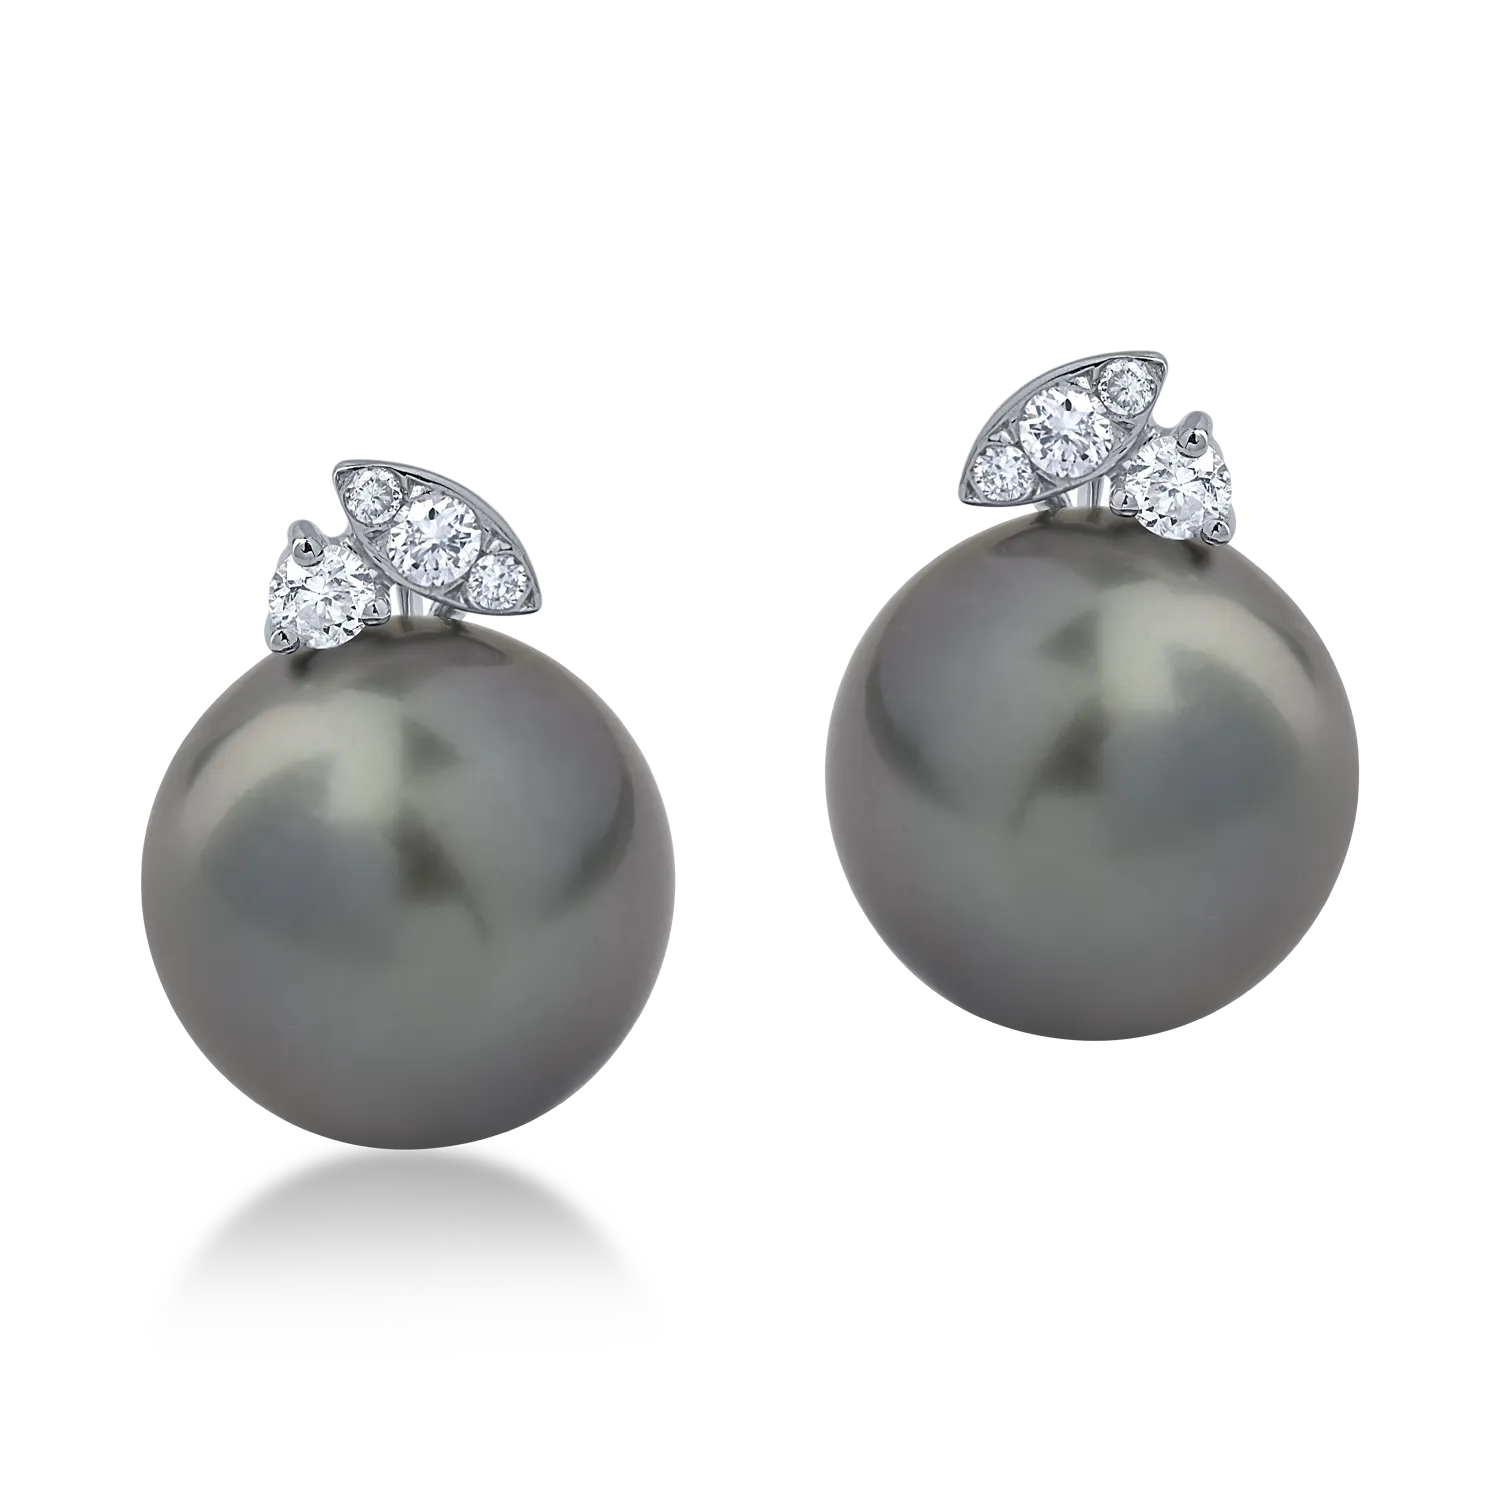 White gold earrings with 0.14ct diamonds and fresh water pearls